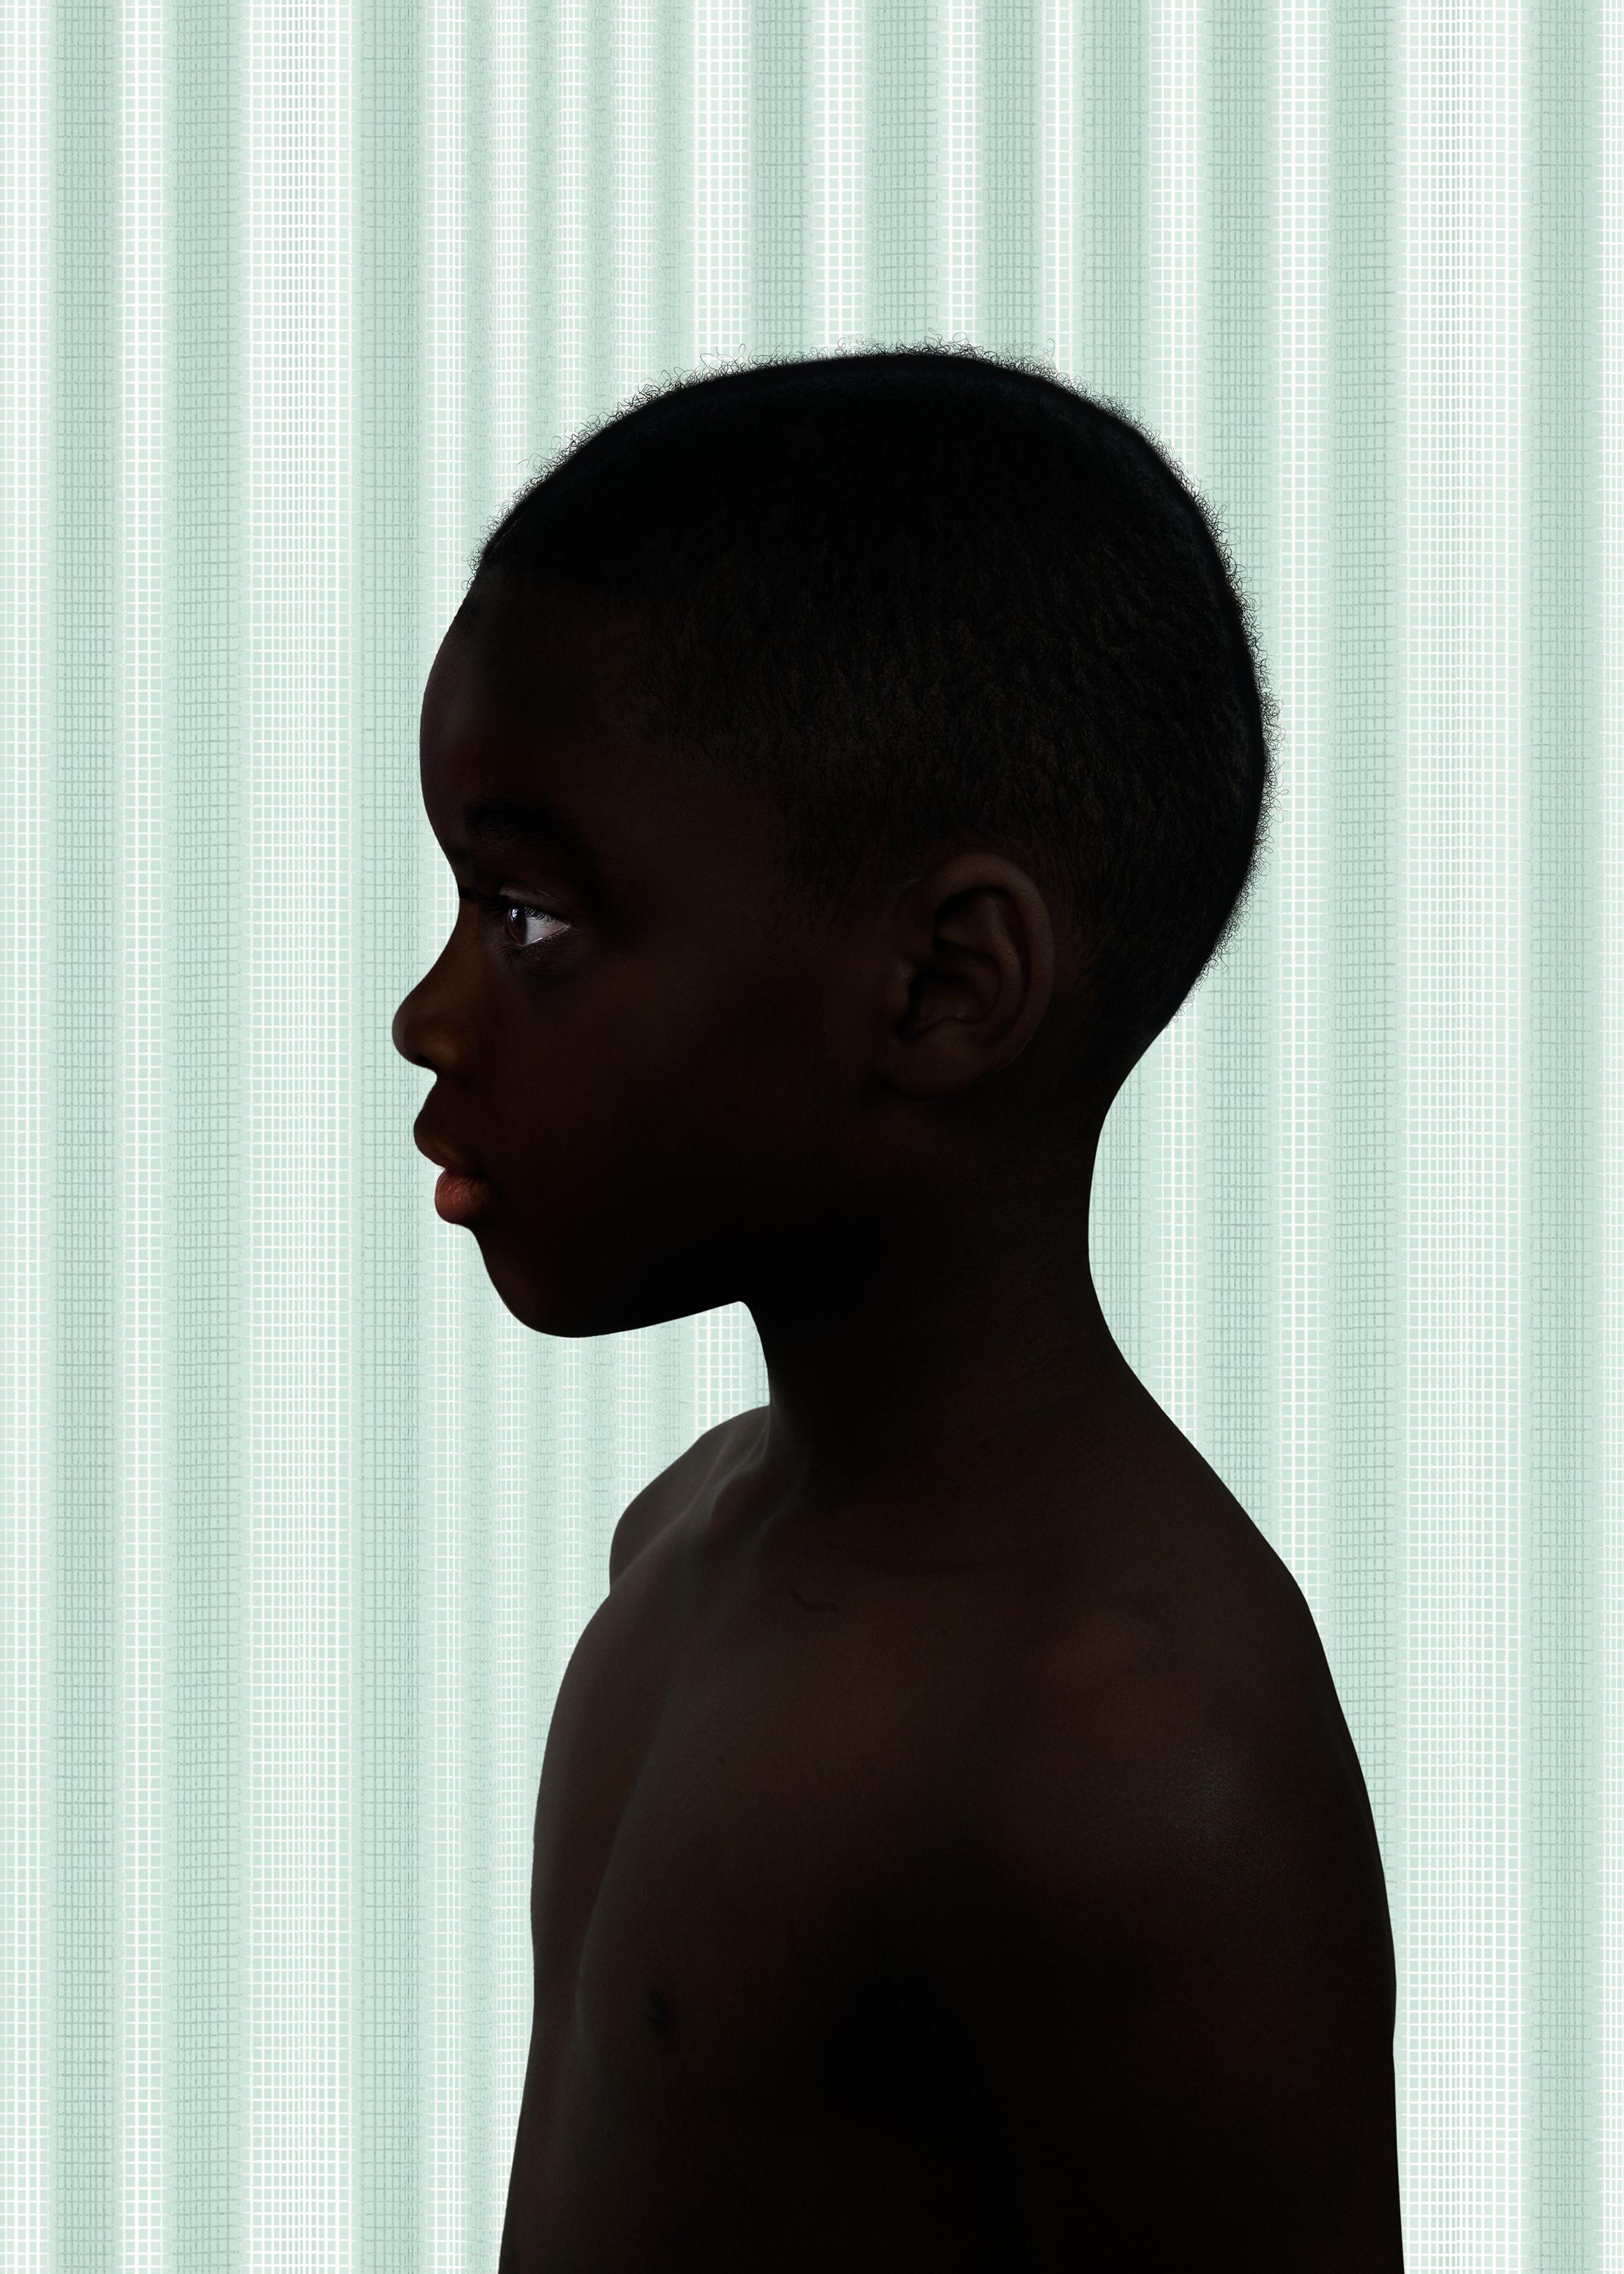 Signed, dated inscribed with title and numbered on label on reverse
Archival pigment print
27 1/2 x 19 1/2 inches
From an edition of 10 + 2 APs

Ruud van Empel (b. 1958) is one of the most innovative contemporary photographers working today. Van